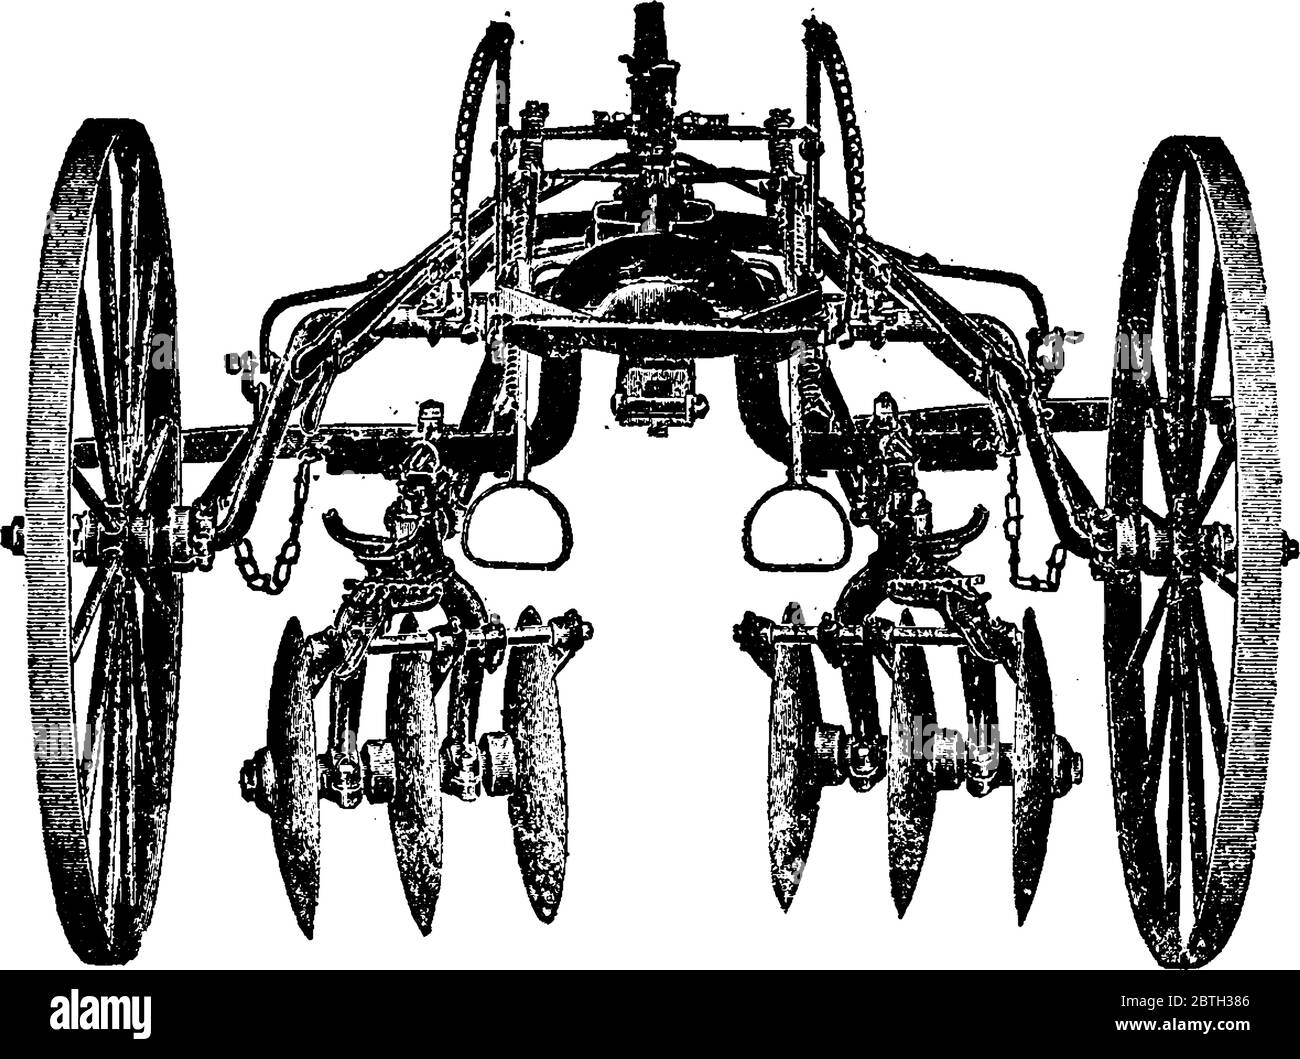 Disc cultivator has two large wheels and six small discs foor cutting soil, vintage line drawing or engraving illustration. Stock Vector